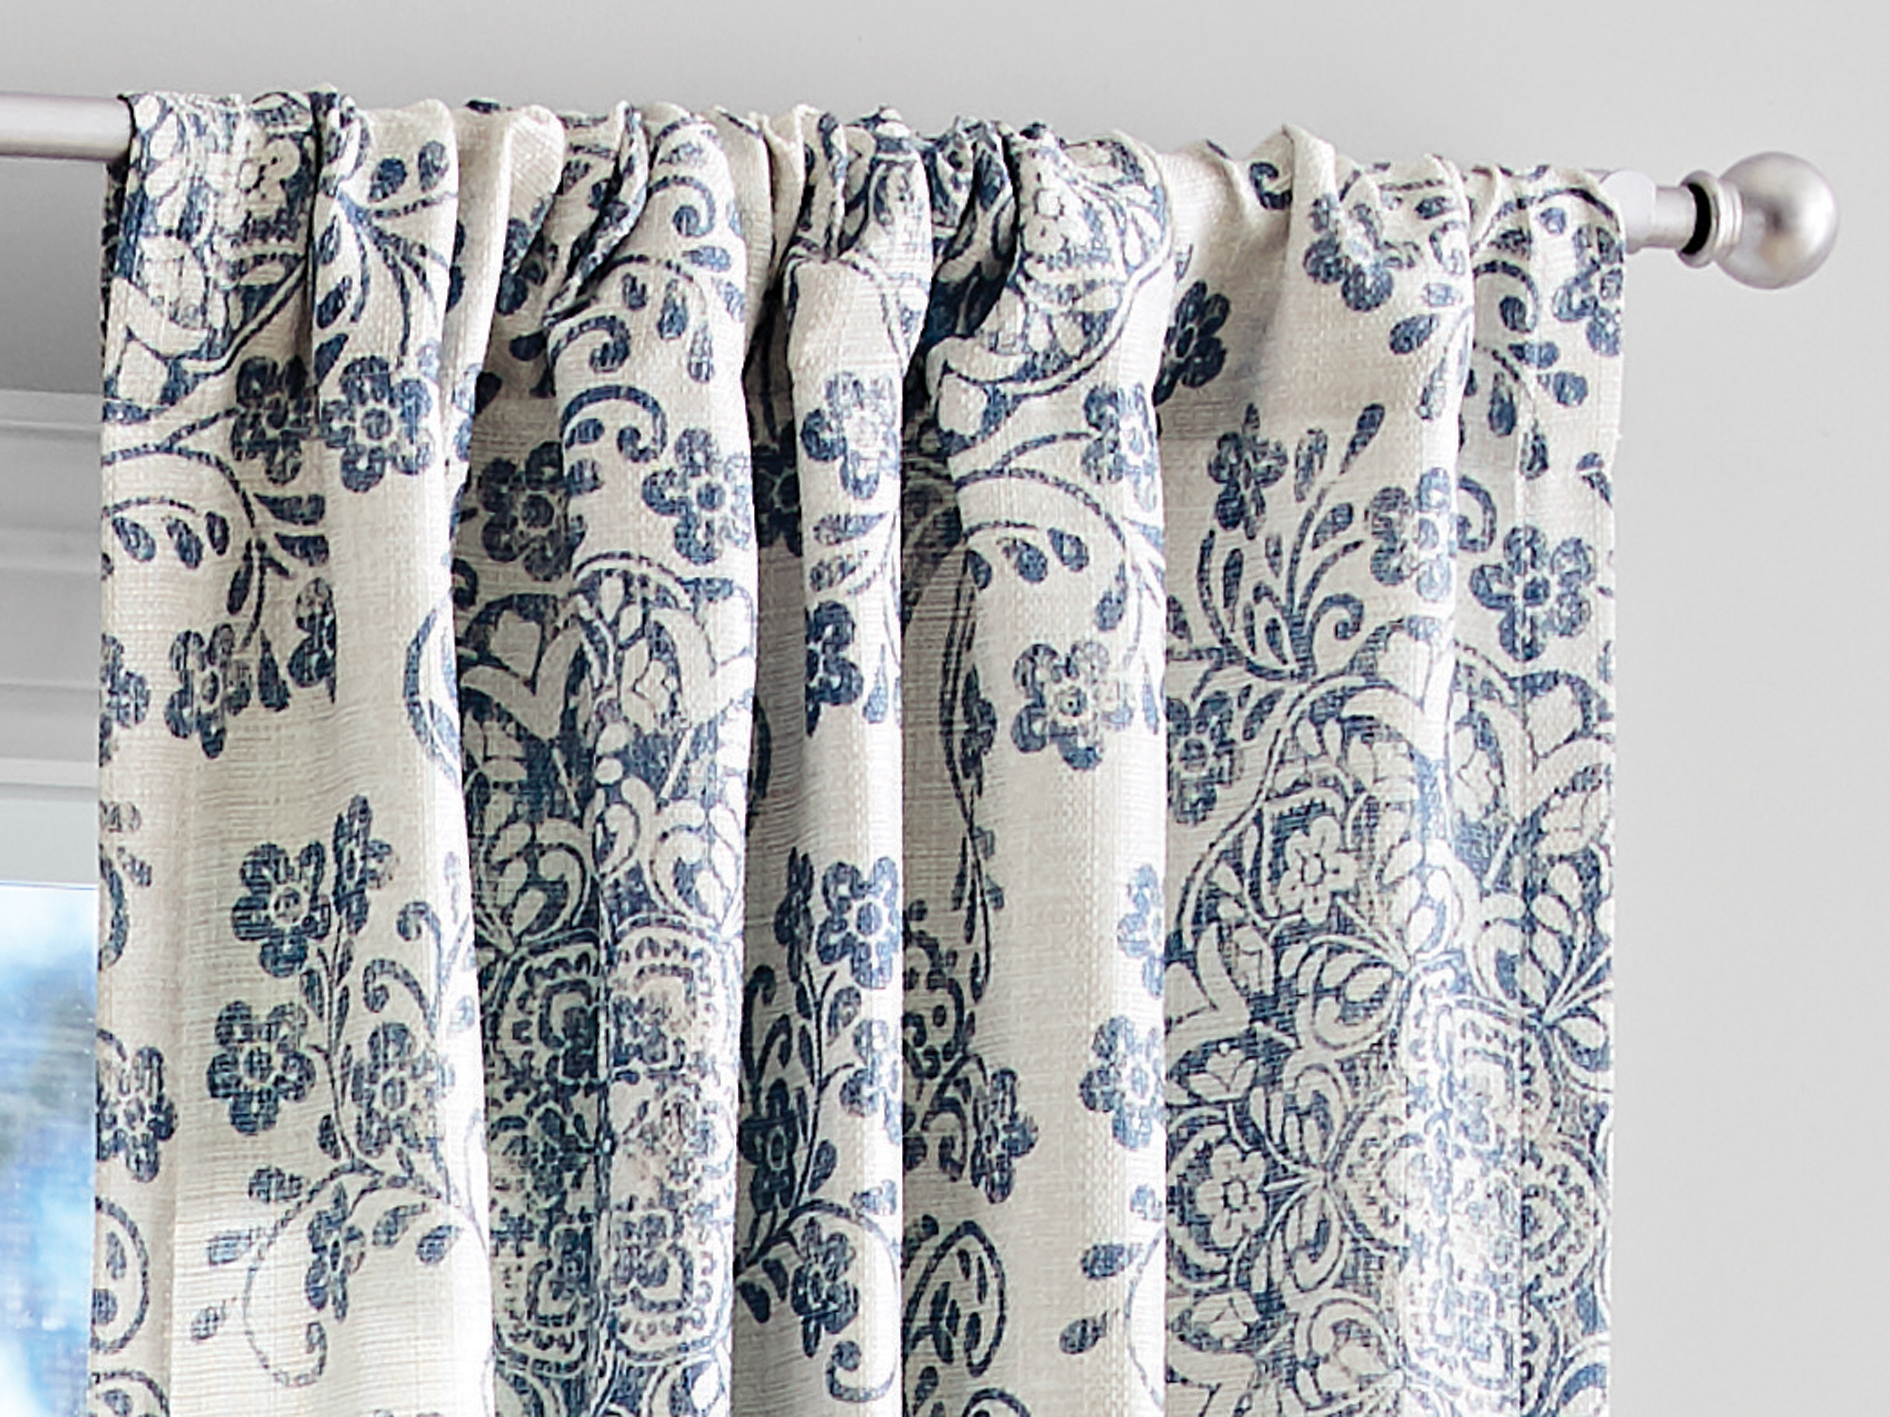 Mainstays Southport Damask Print Light Filtering Rod Pocket Curtain Panel Pair, Set of 2, Blue, 40 x 84 - image 2 of 7